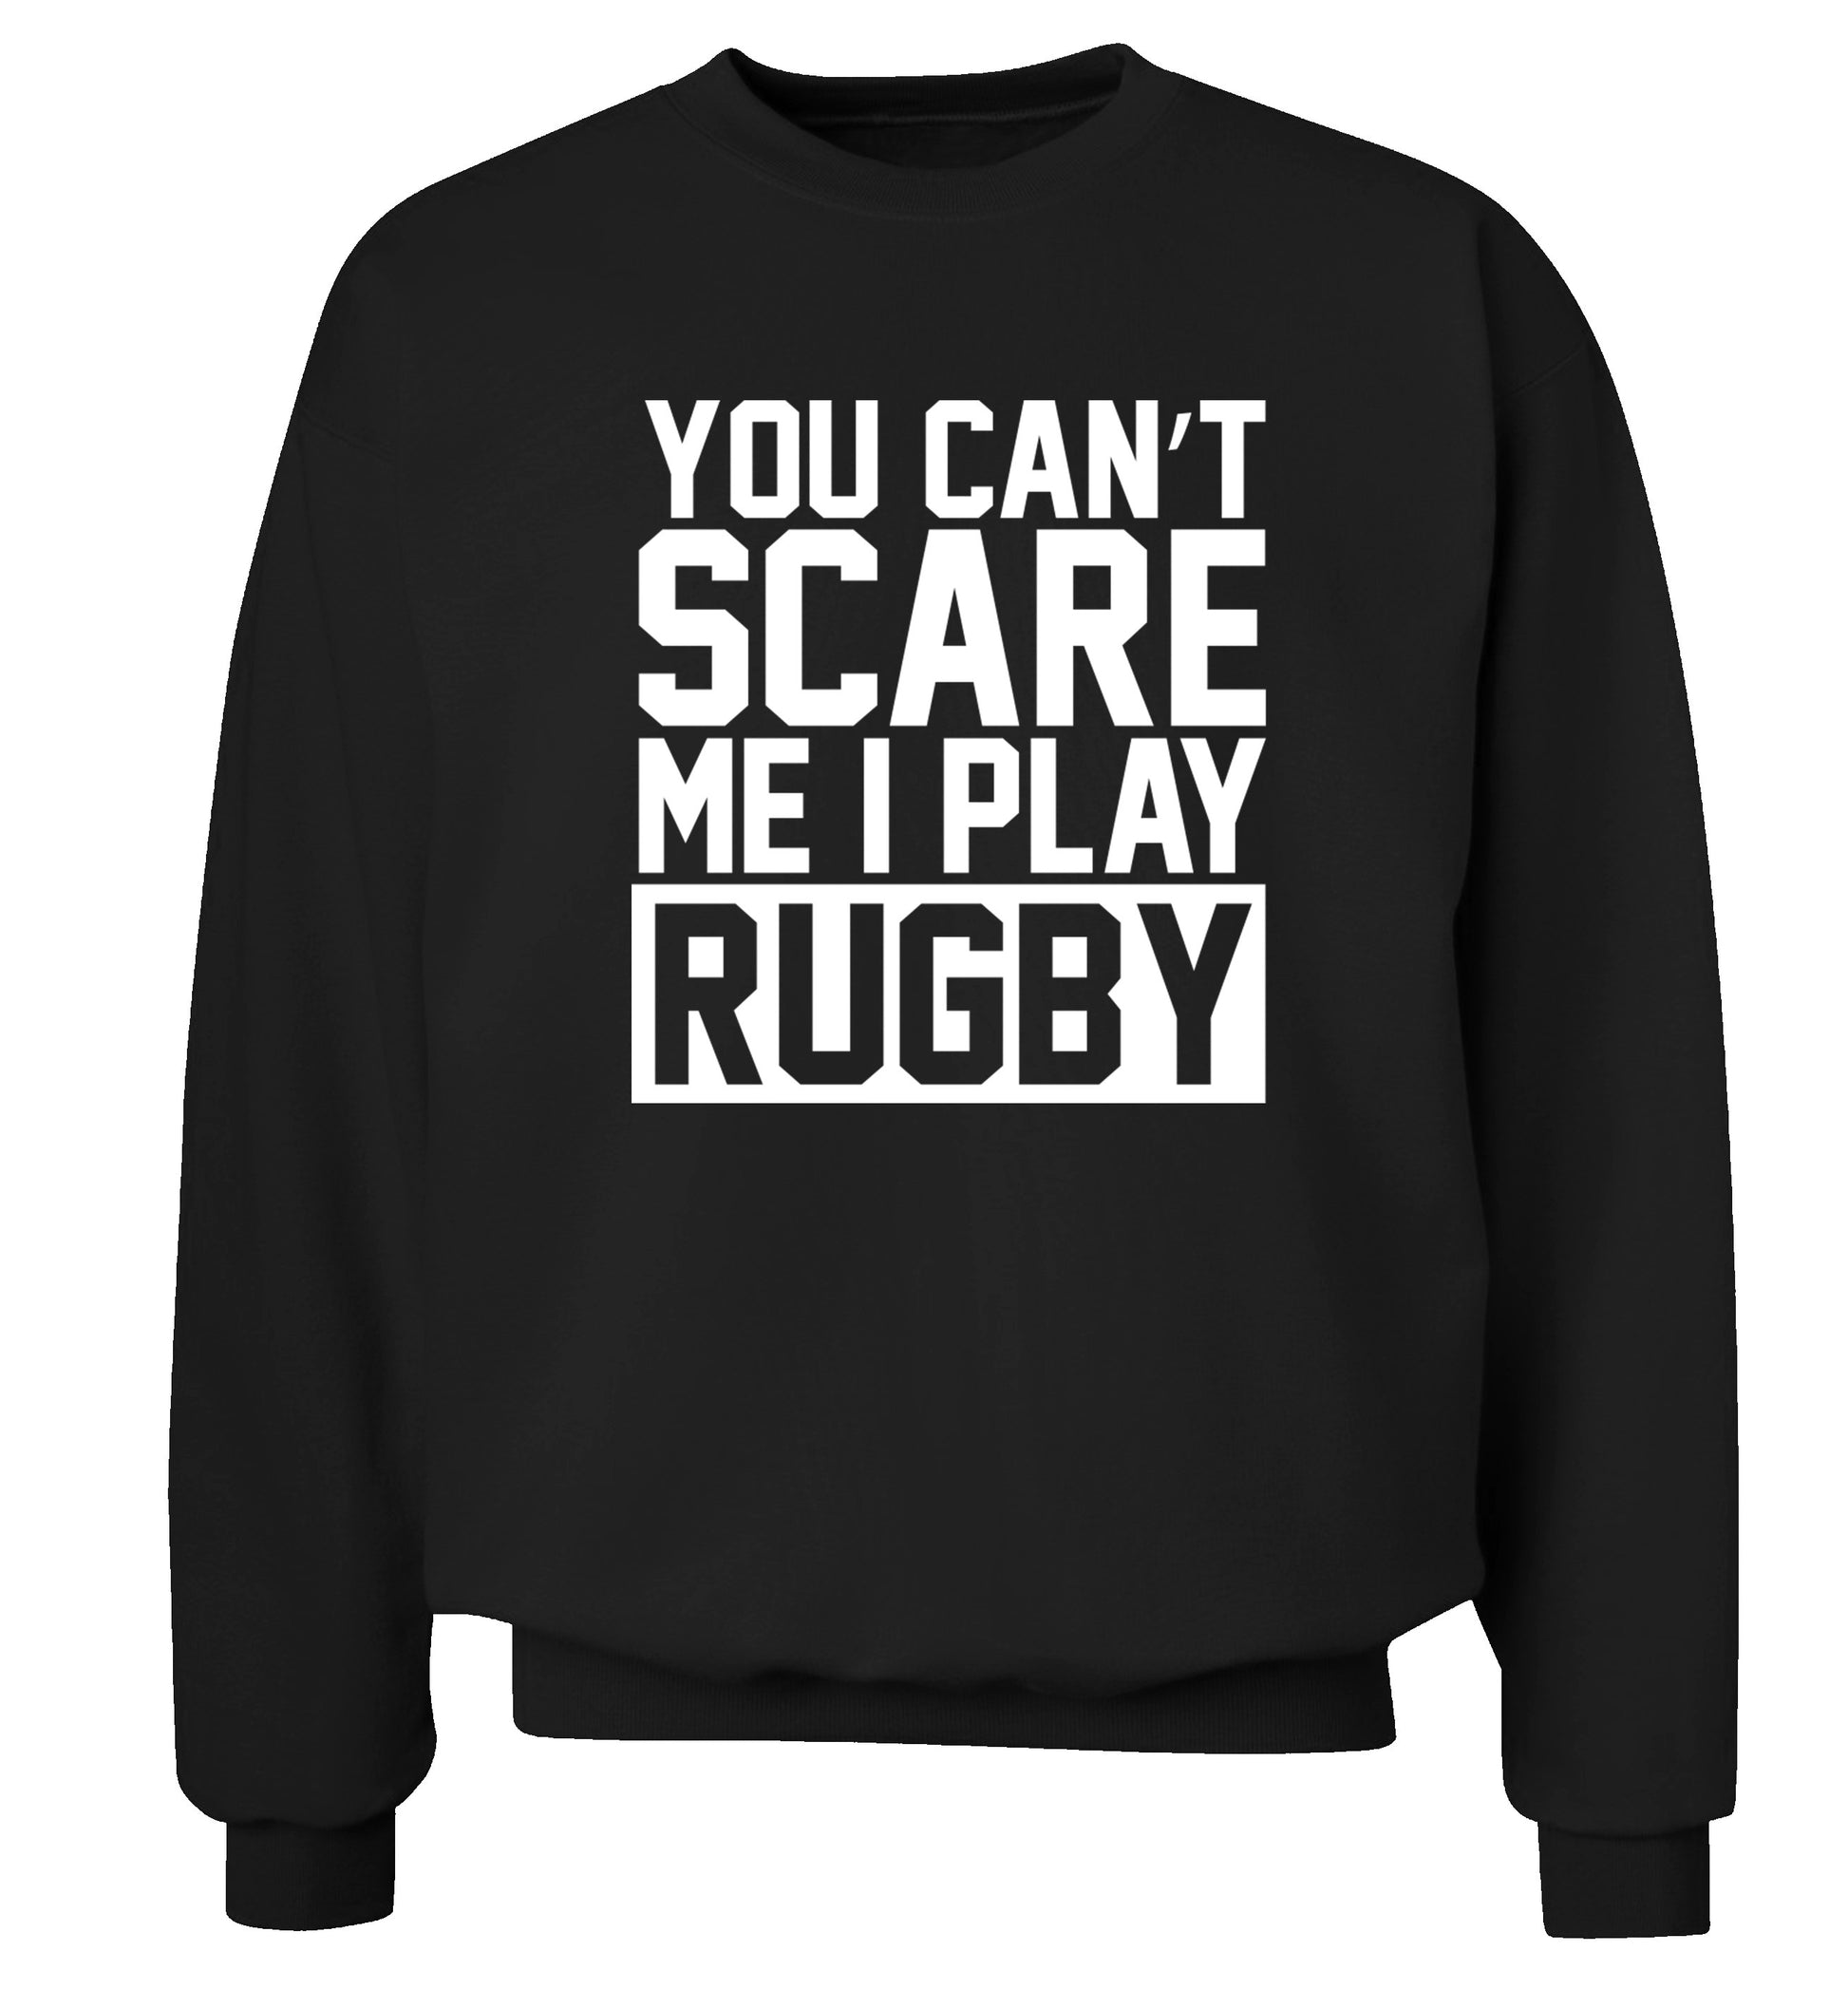 You can't scare me I play rugby Adult's unisex black Sweater 2XL